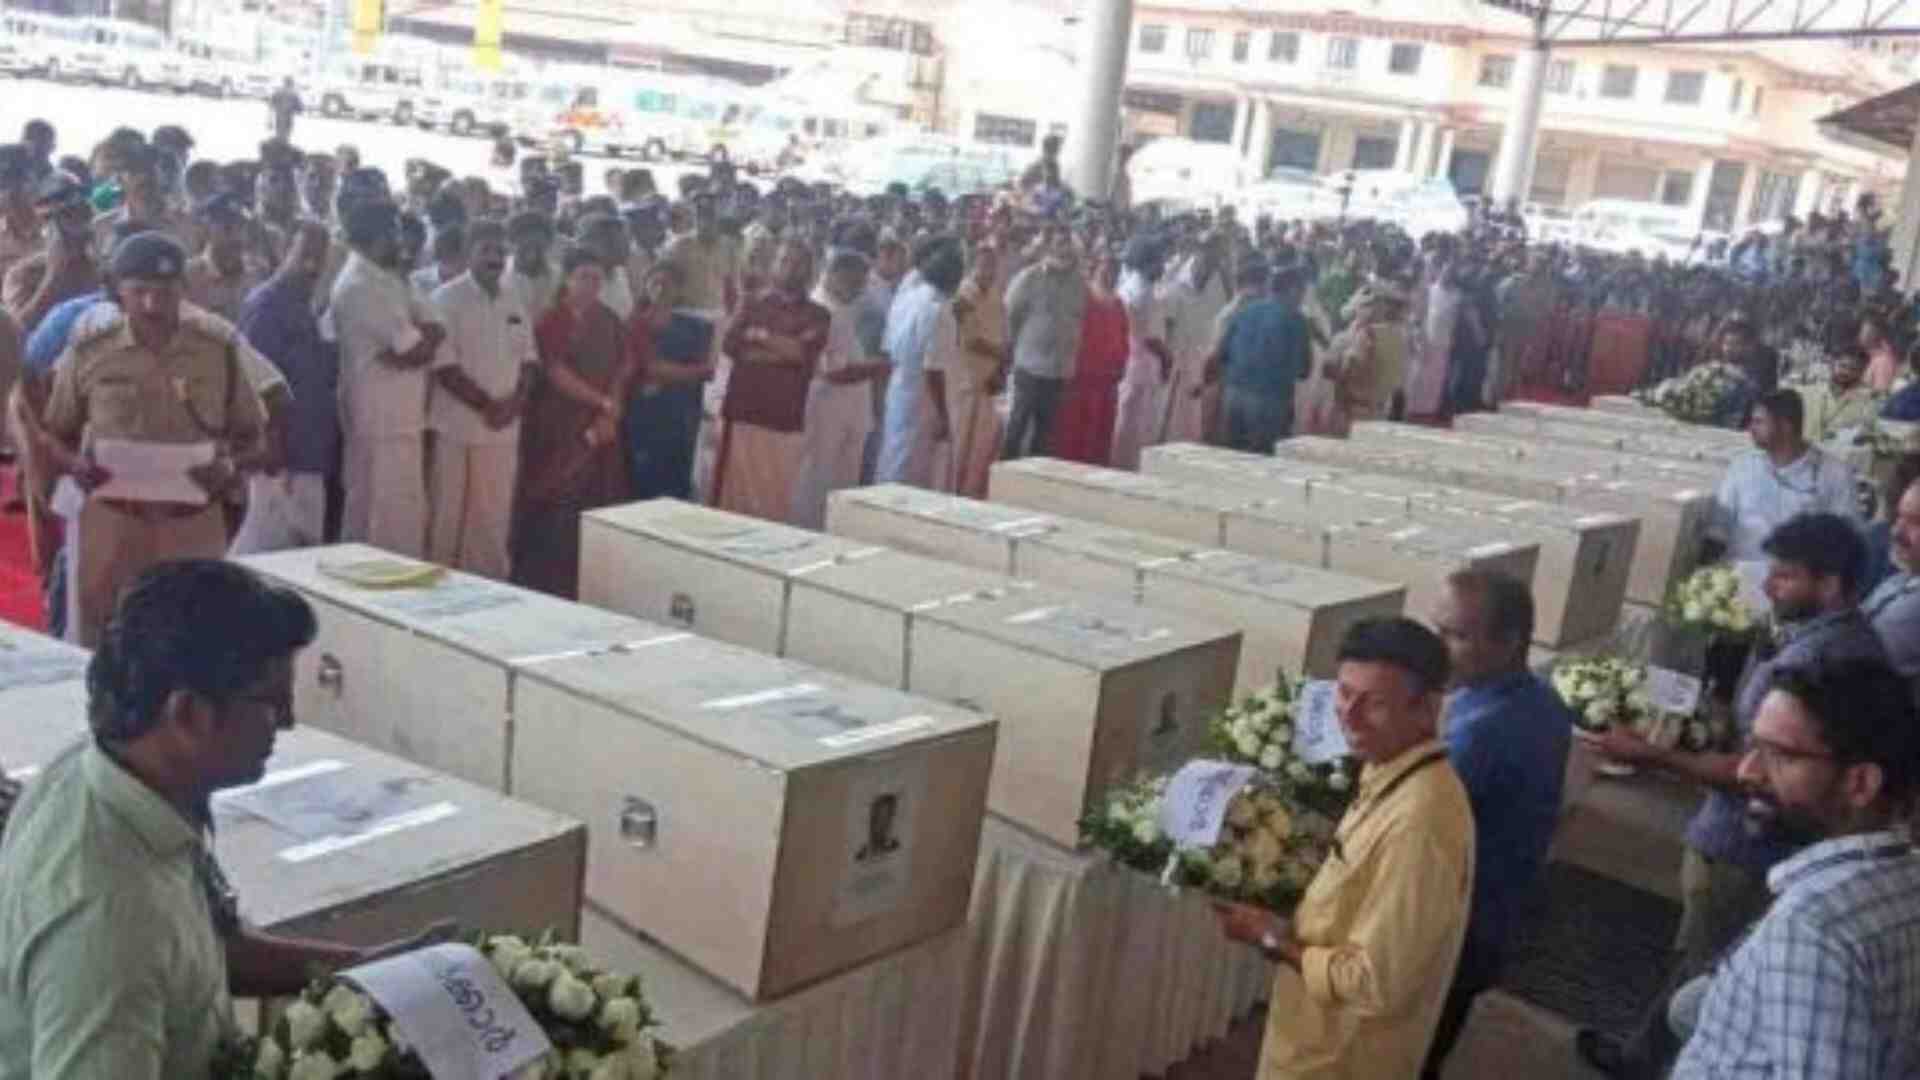 Bodies Of UP Workers Killed In Kuwait Fire Handed Over To Families In Gorakhpur